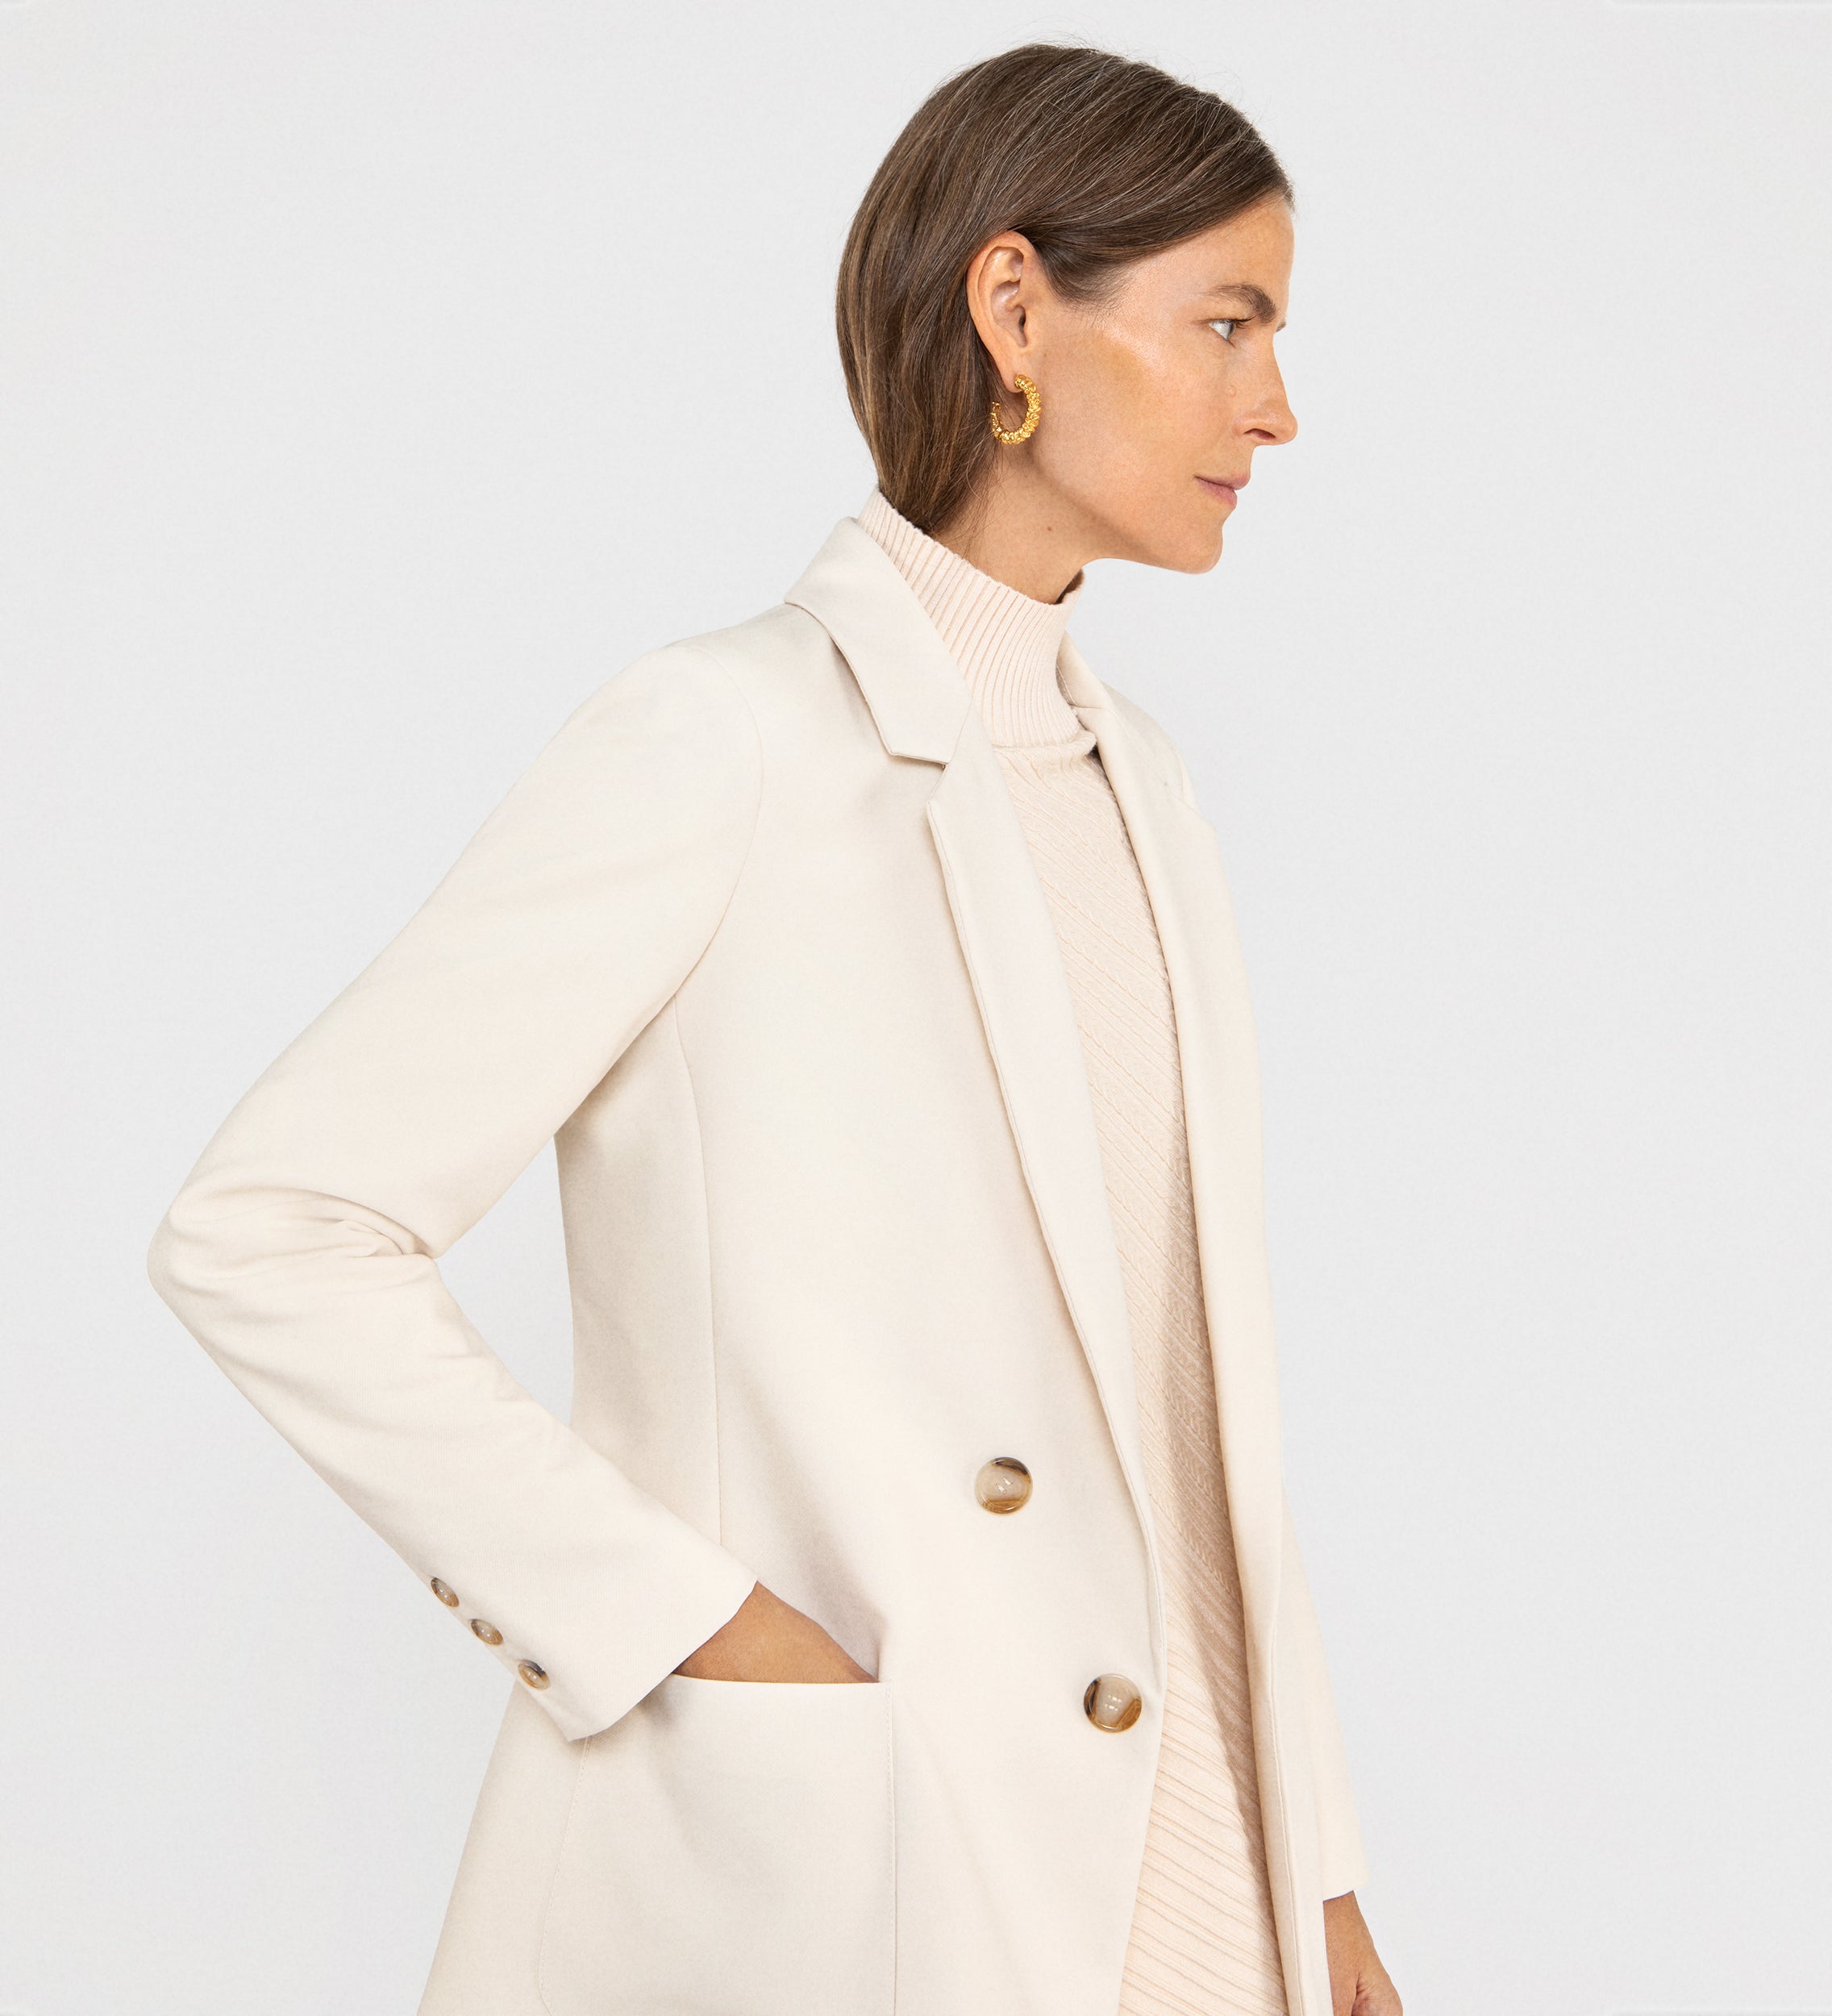 Crepe faux crepe jacket crossover